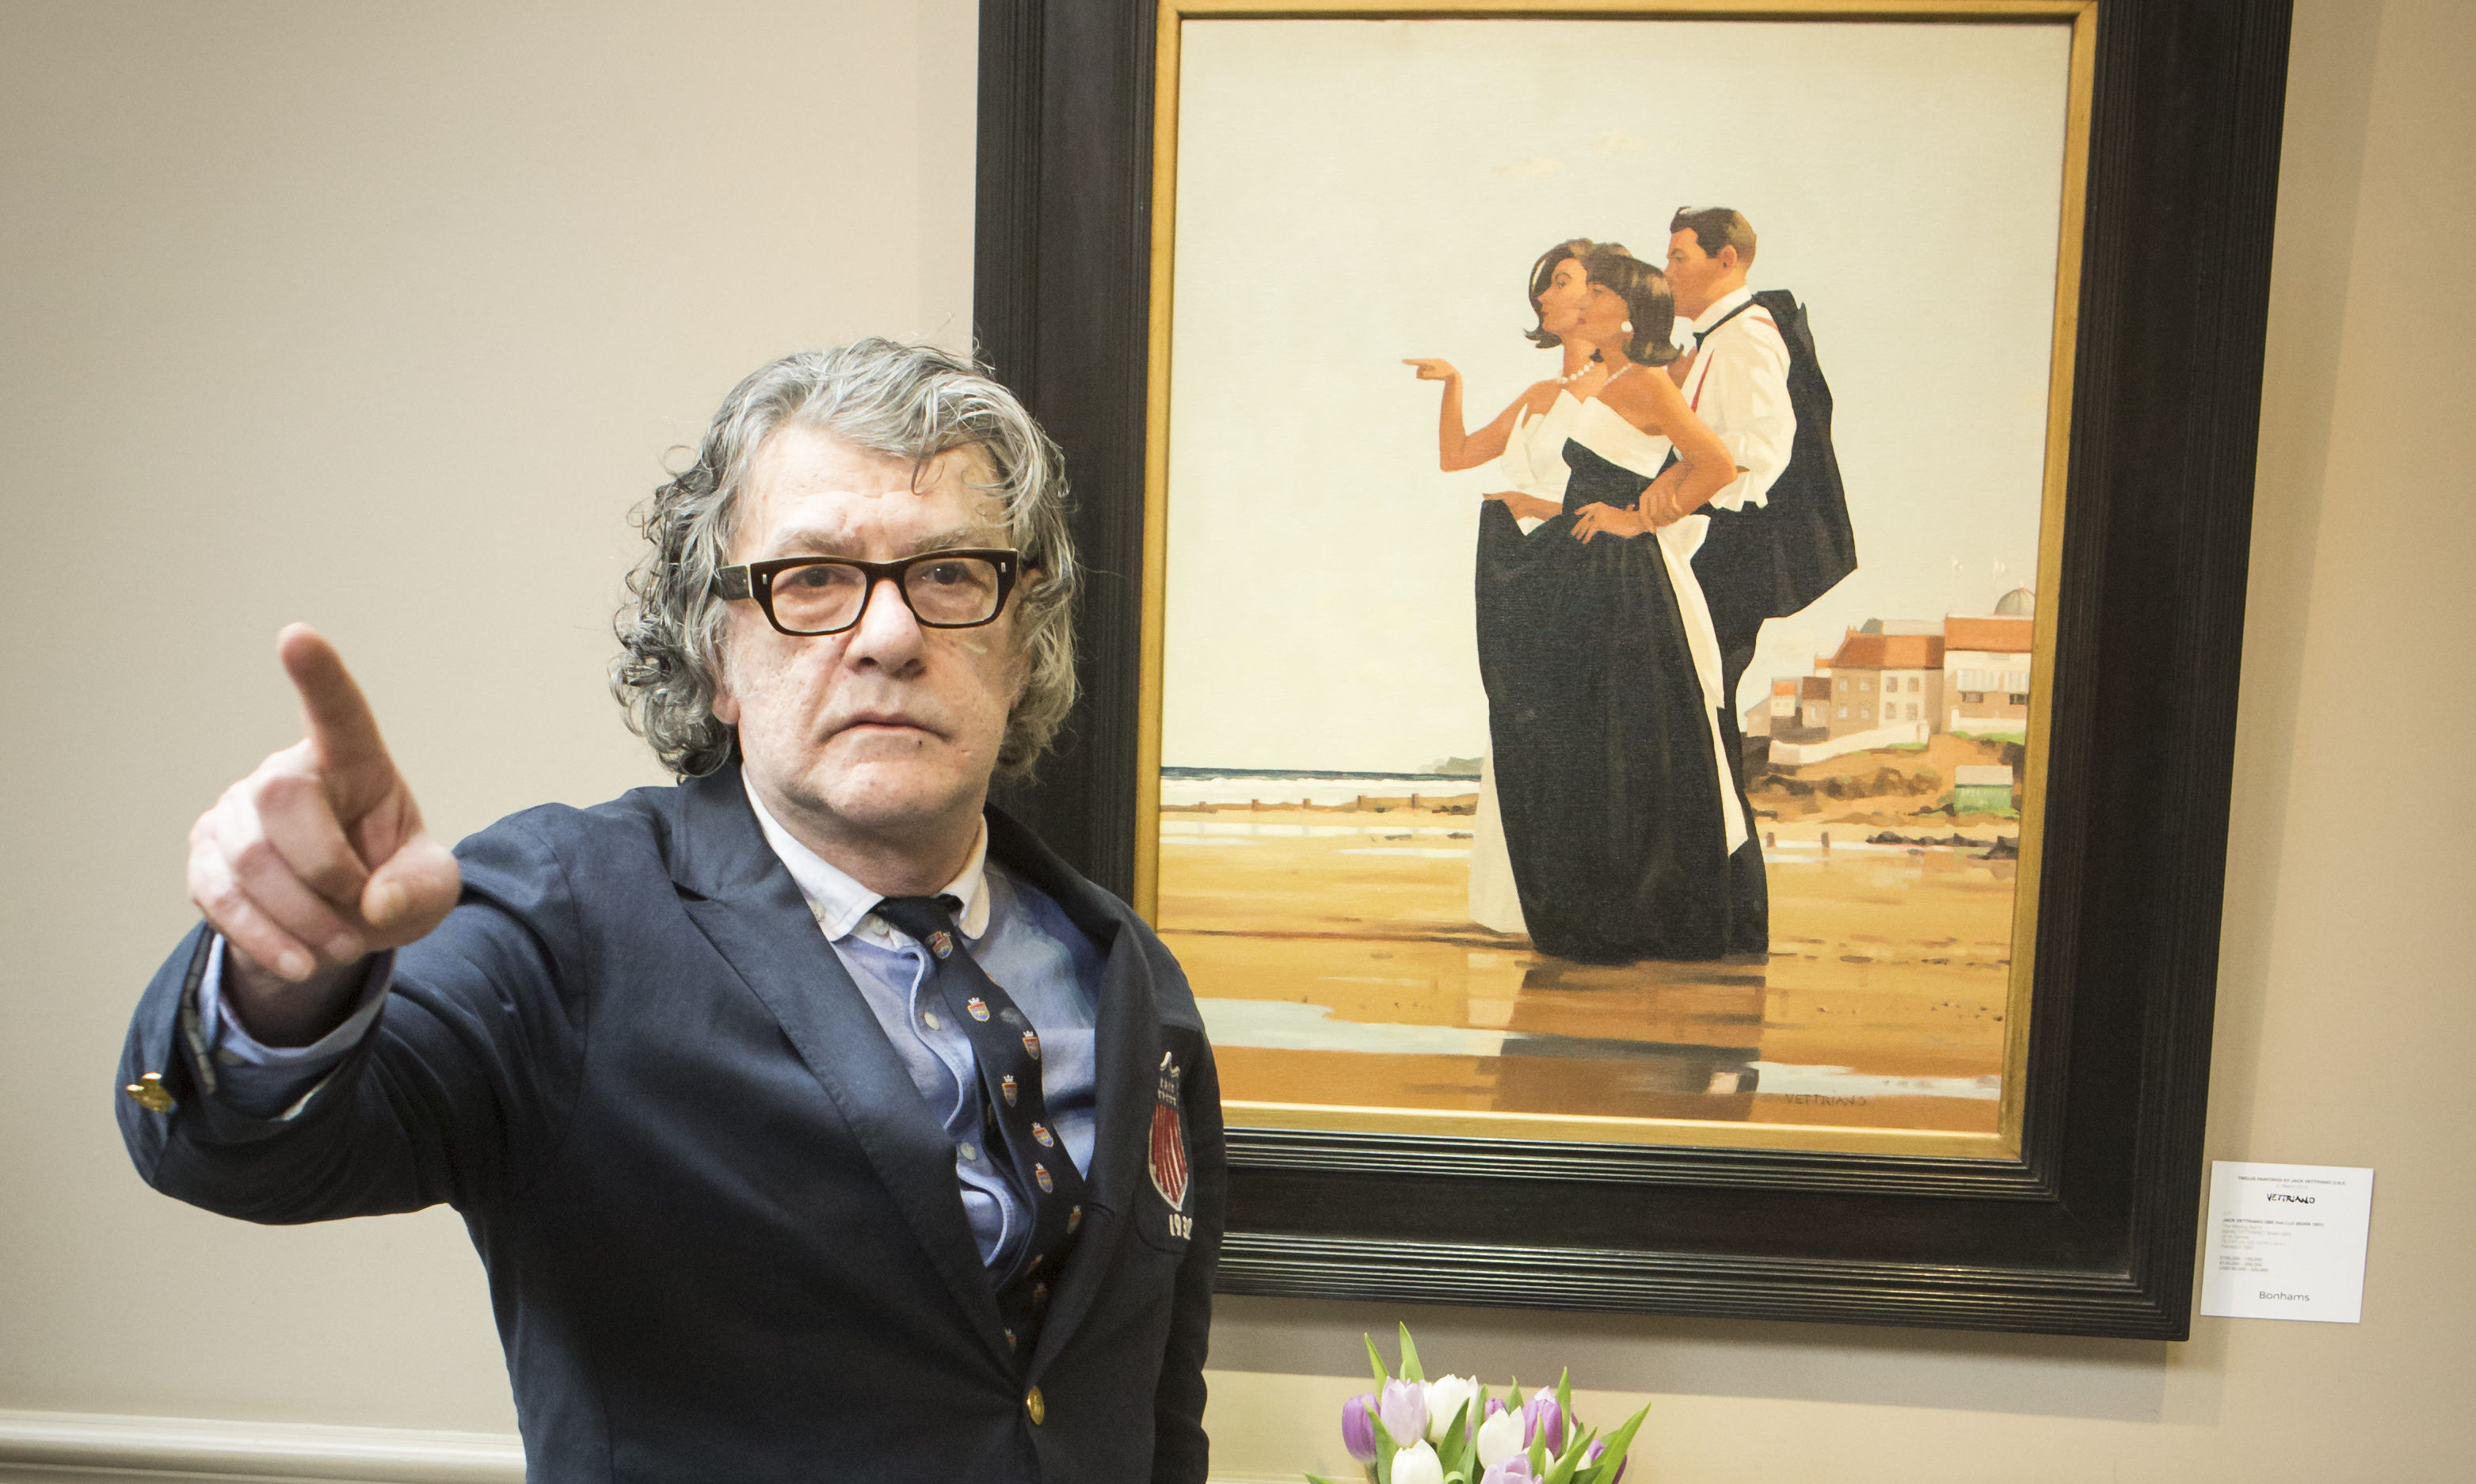 Jack Vettriano with his work The Missing Man II,